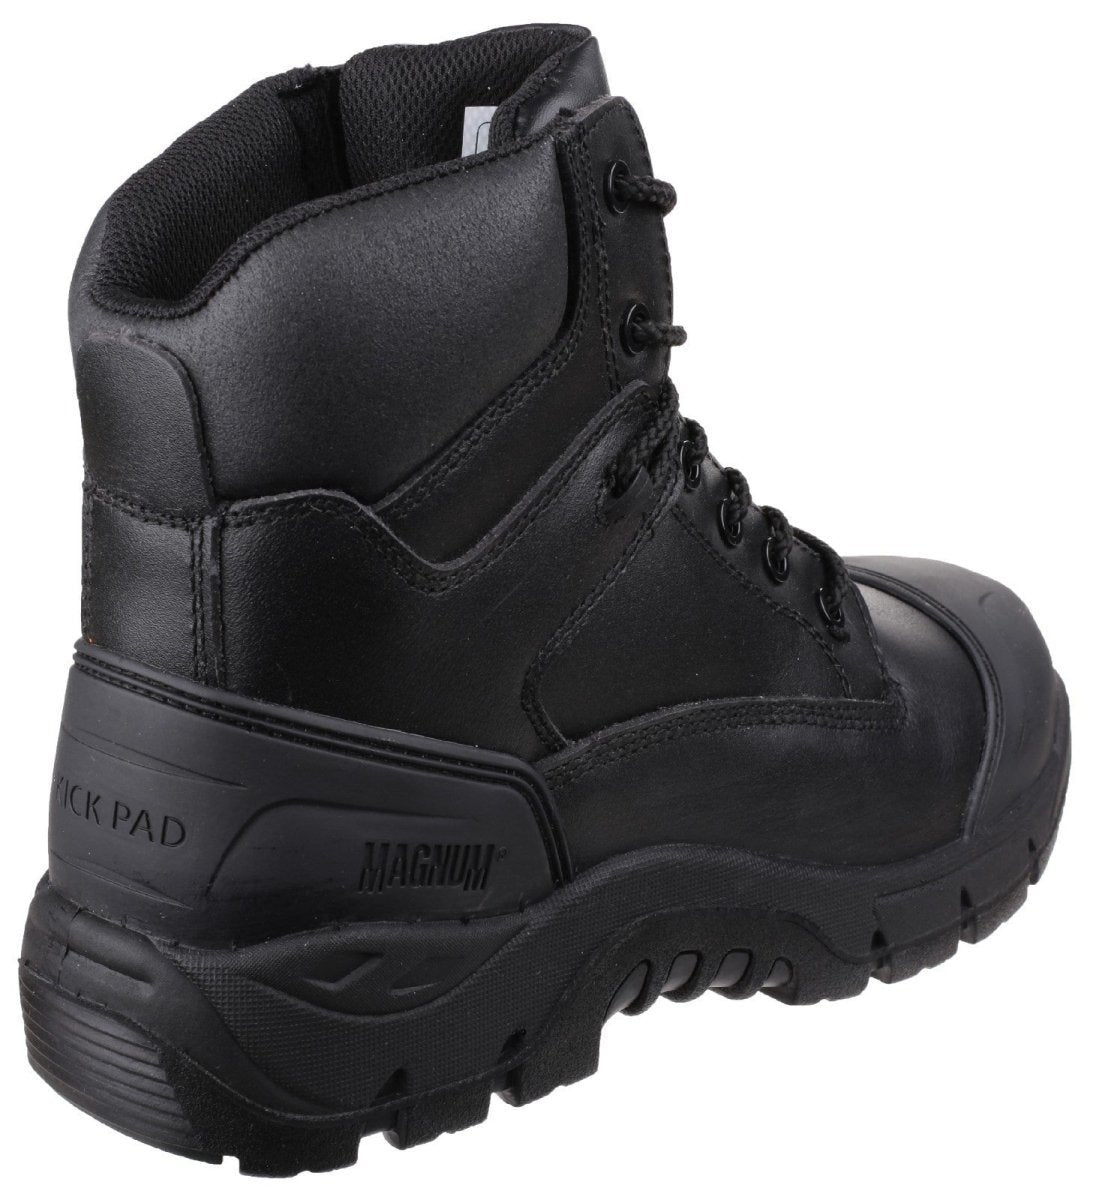 Magnum Roadmaster Safety Boots - Shoe Store Direct